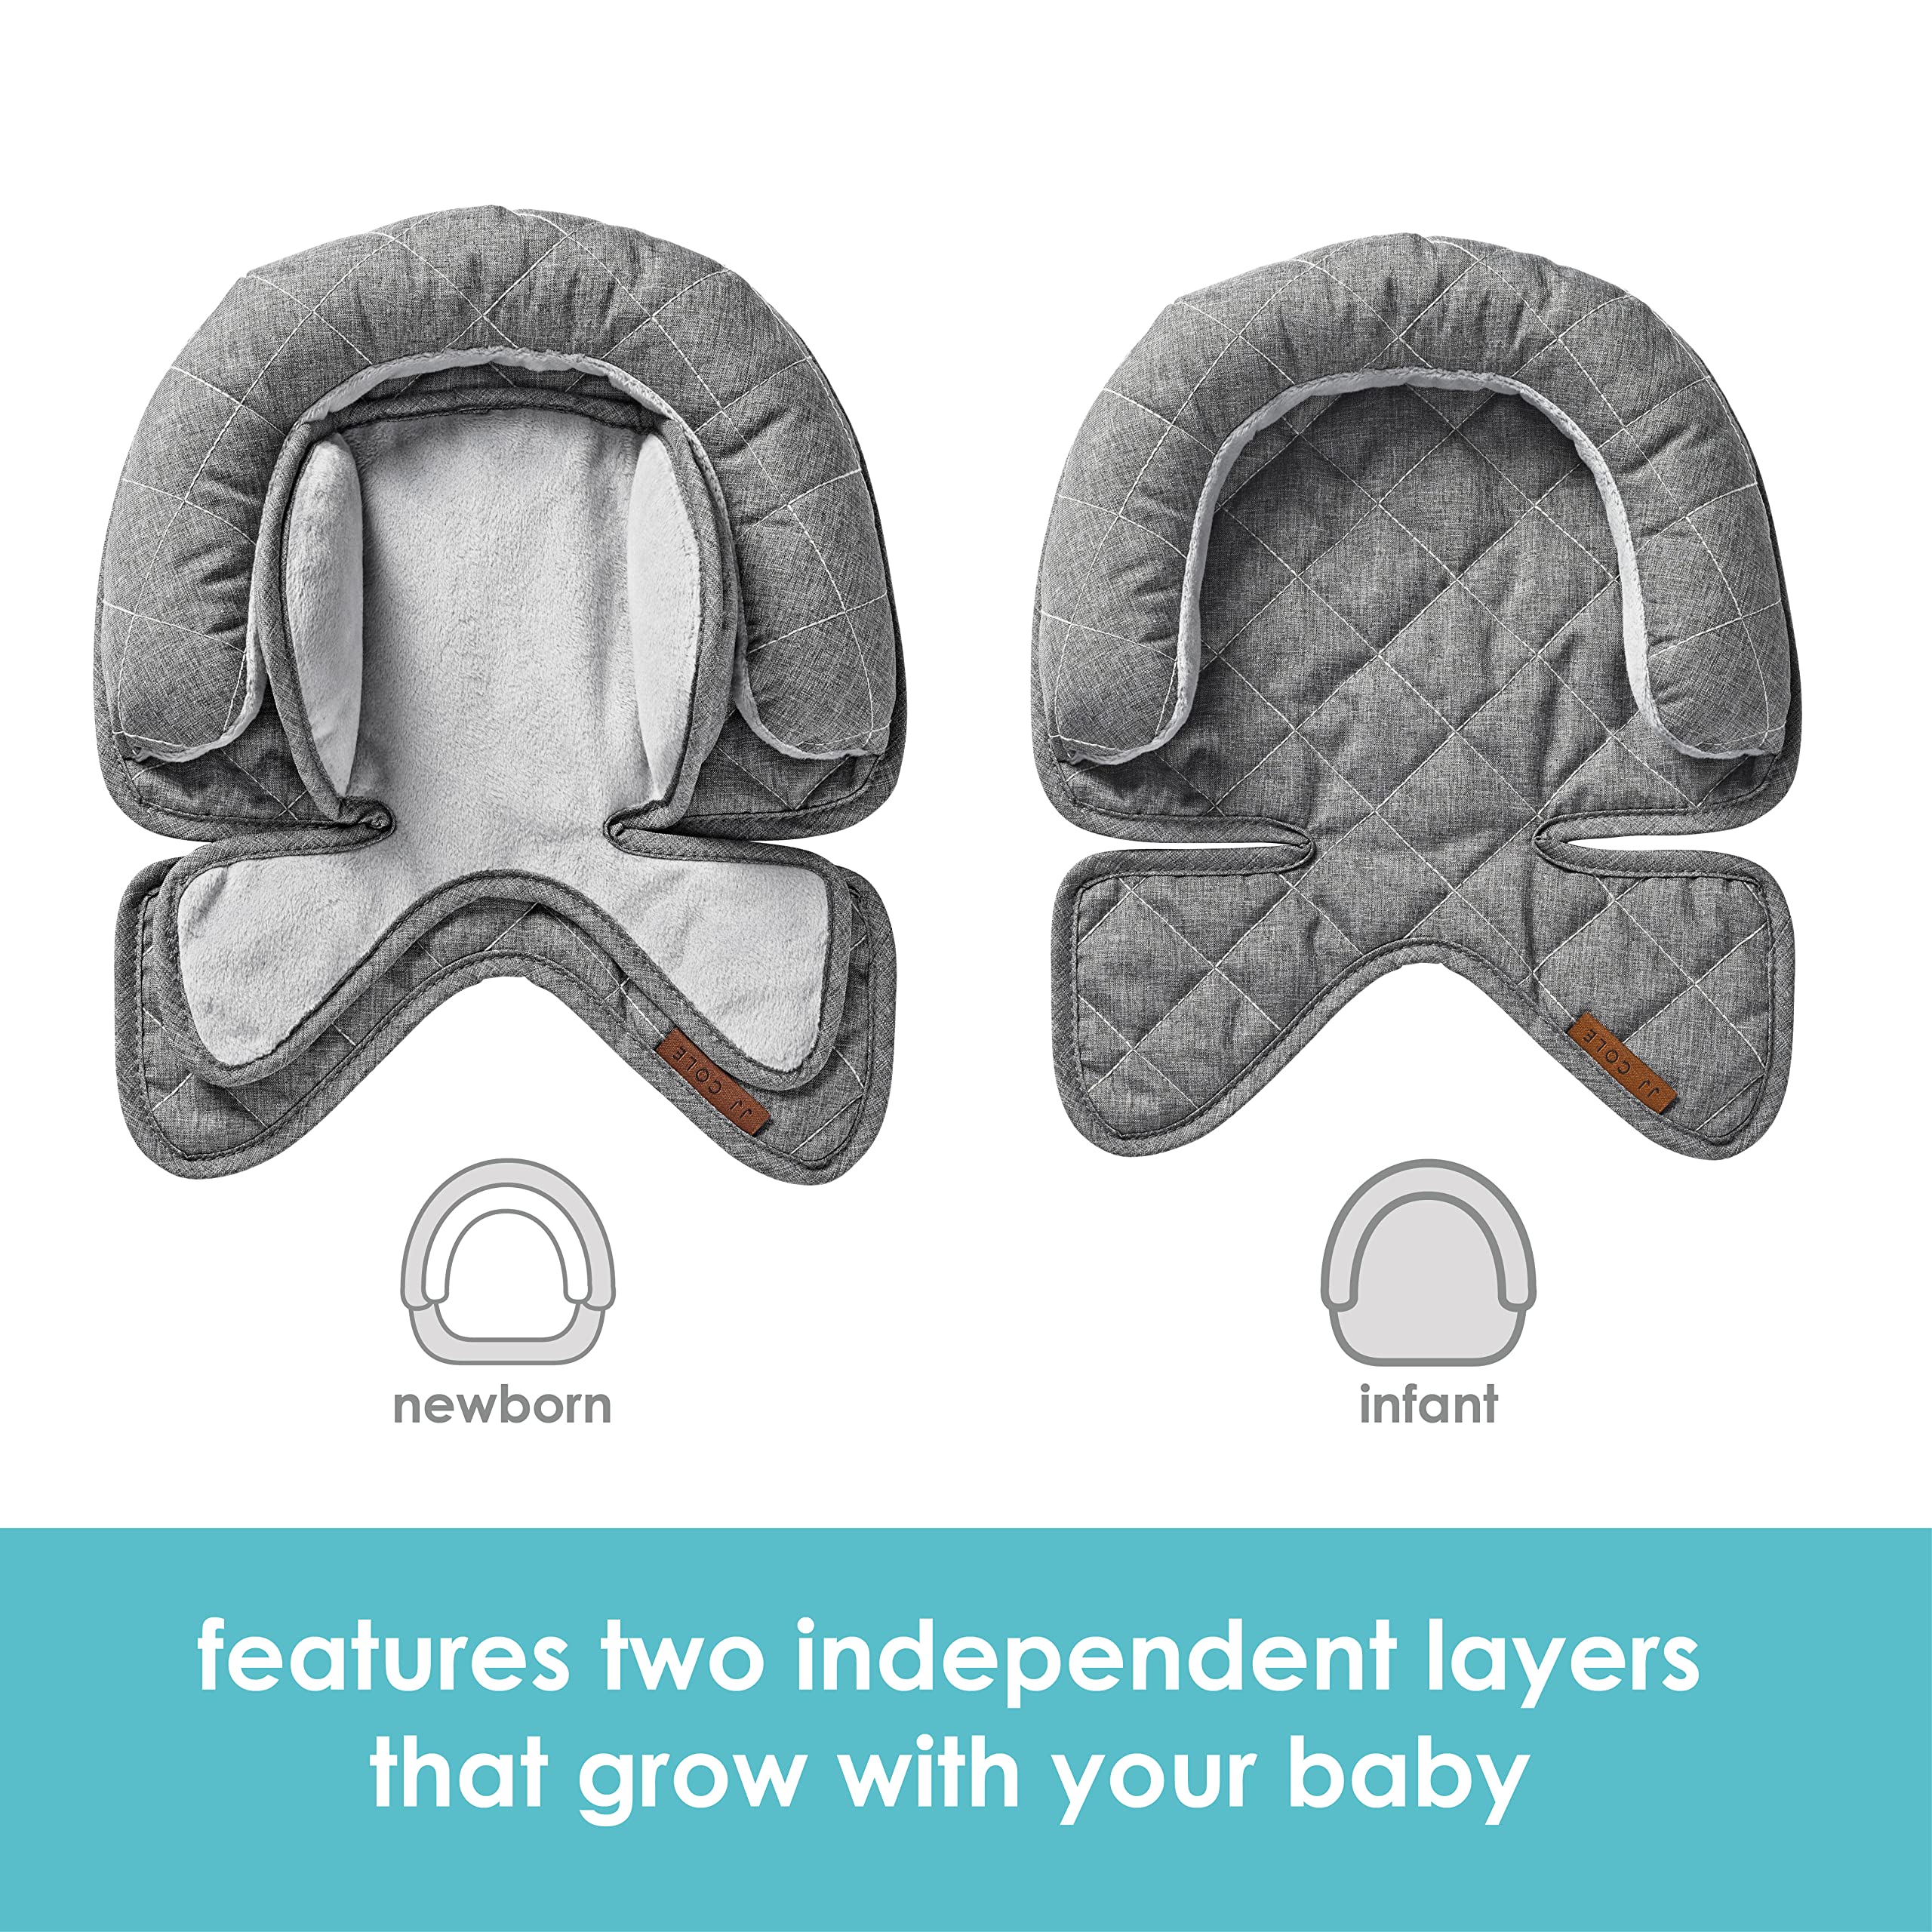 JJ Cole - Head Support, Newborn Head and Neck Support for Car Seat and Stroller, Designed to Adjust with Age, Grey Herringbone, Birth and Up, Heather Grey